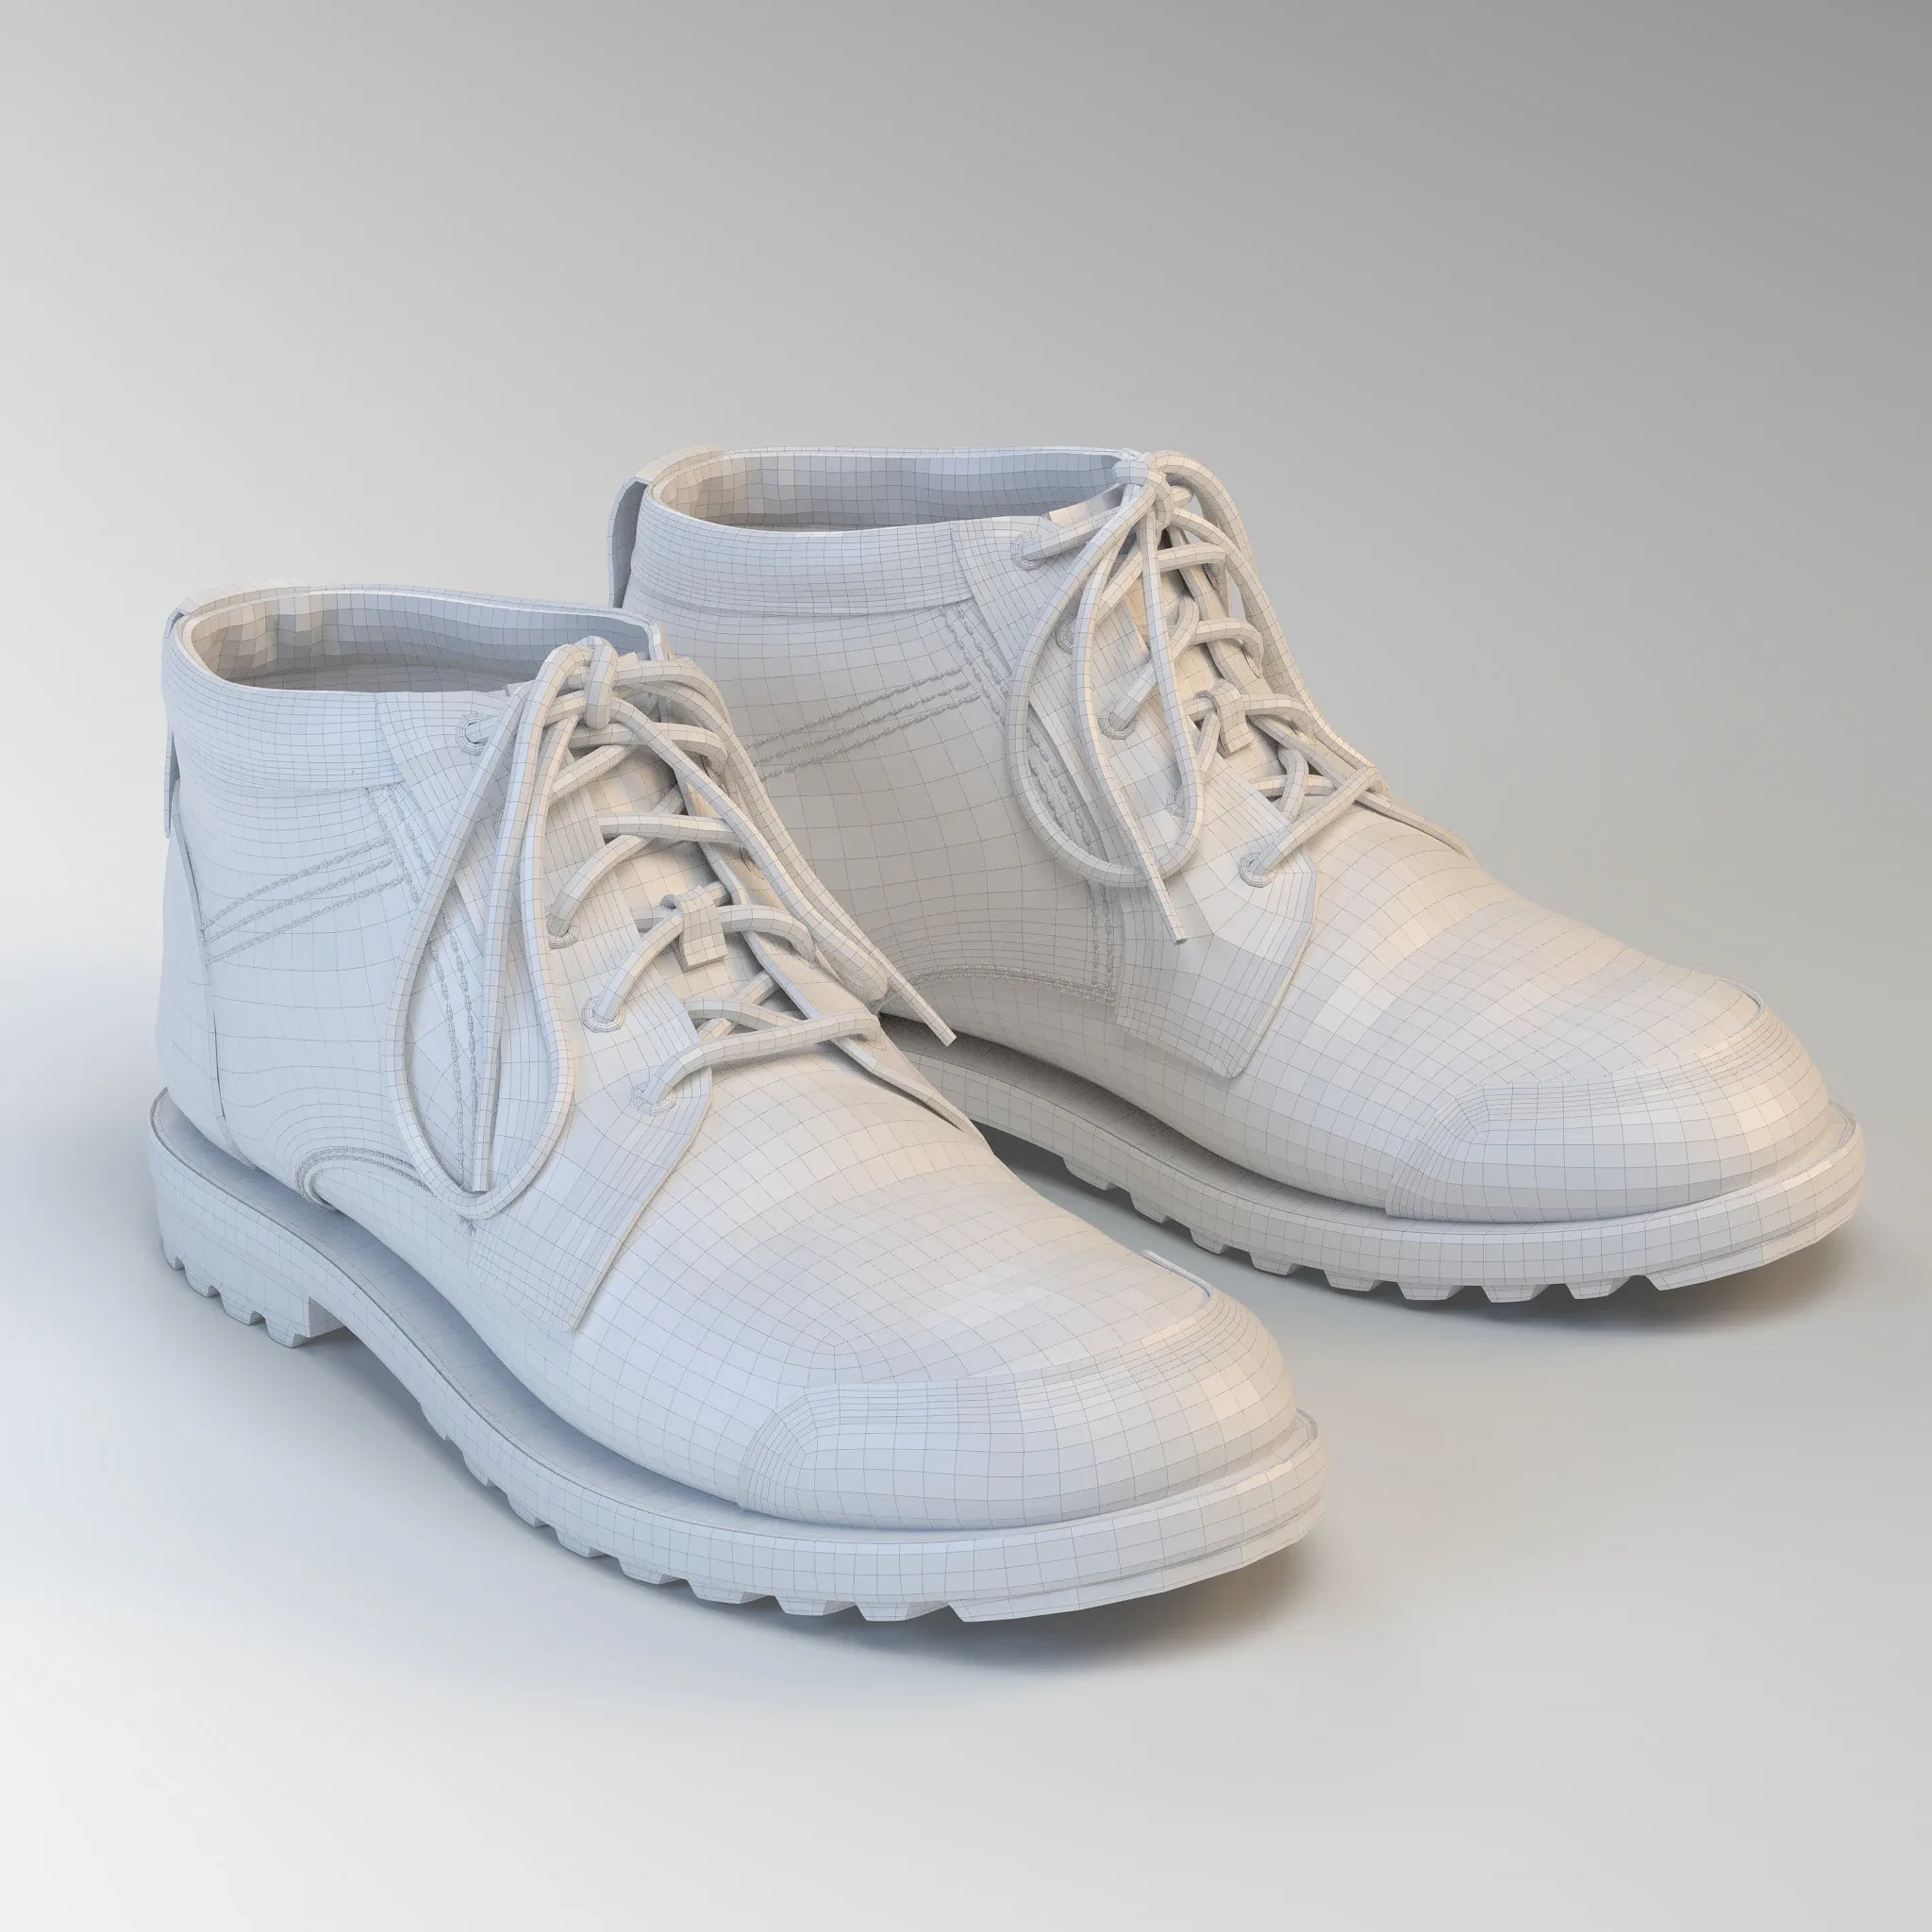 Realistic Boots